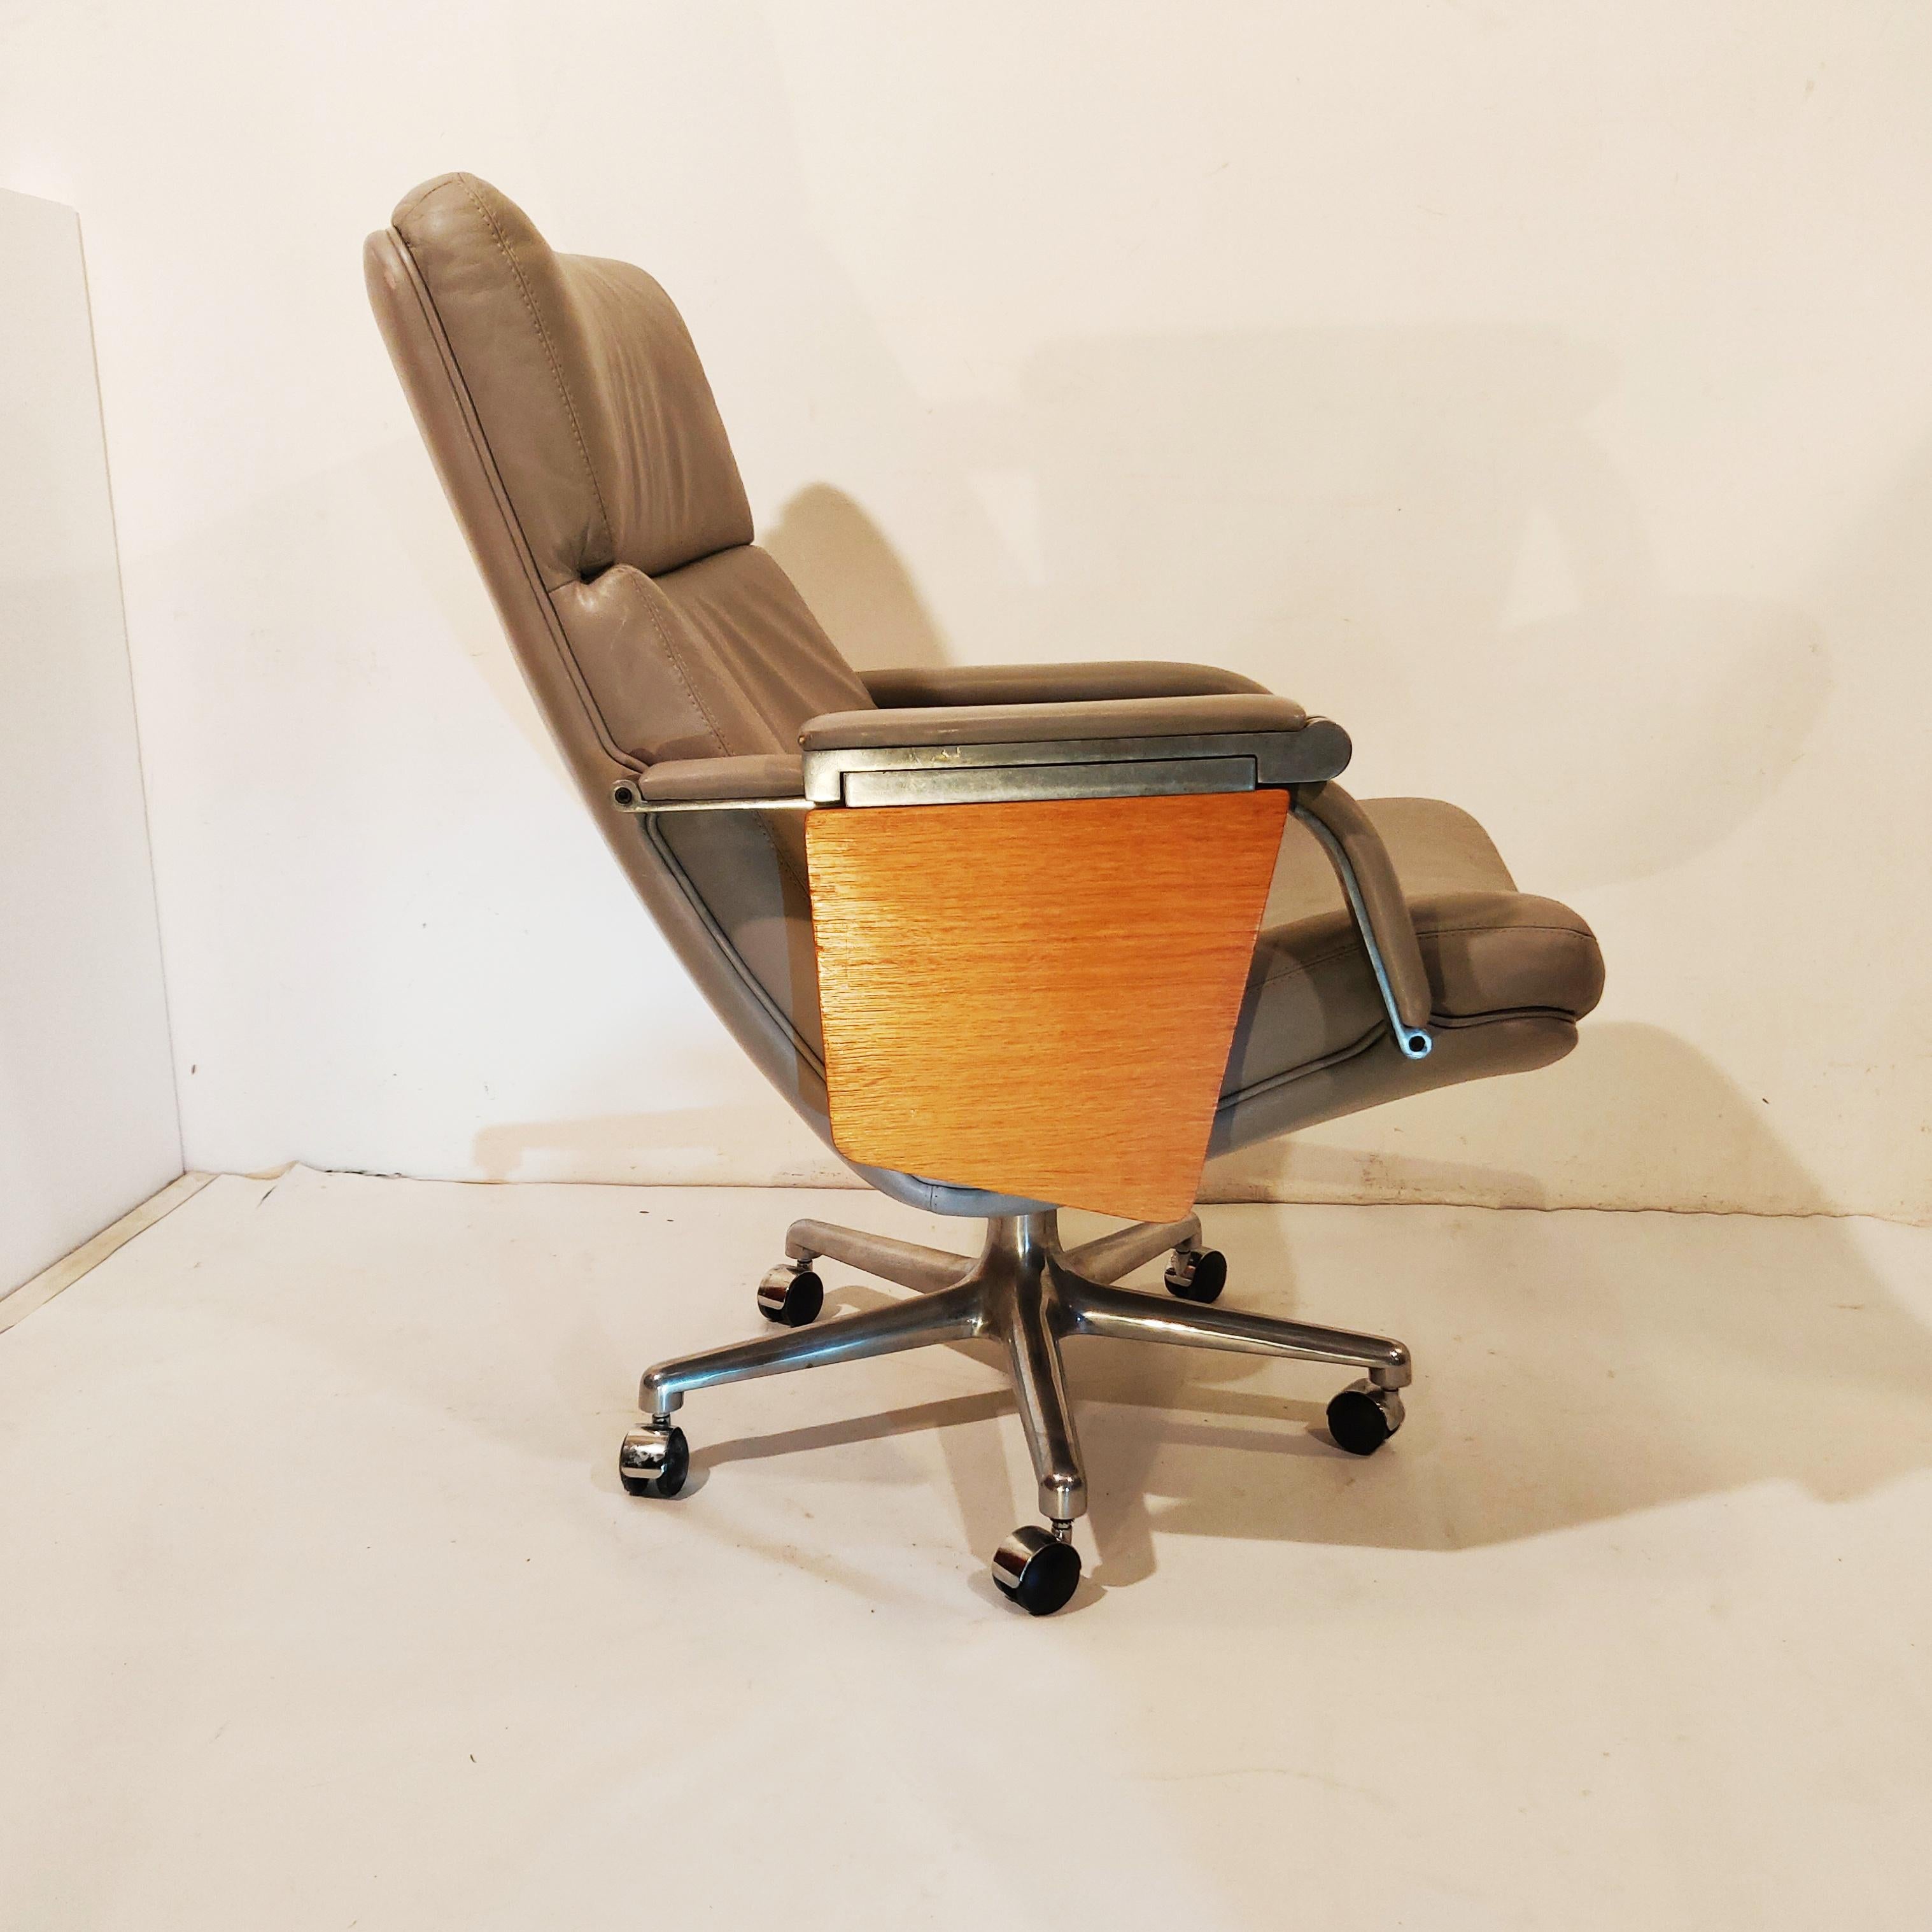 Mid-Century Modern Leather Swivel Chair with Wooden Writing Board by Geoffrey Harcourt, 1970s For Sale